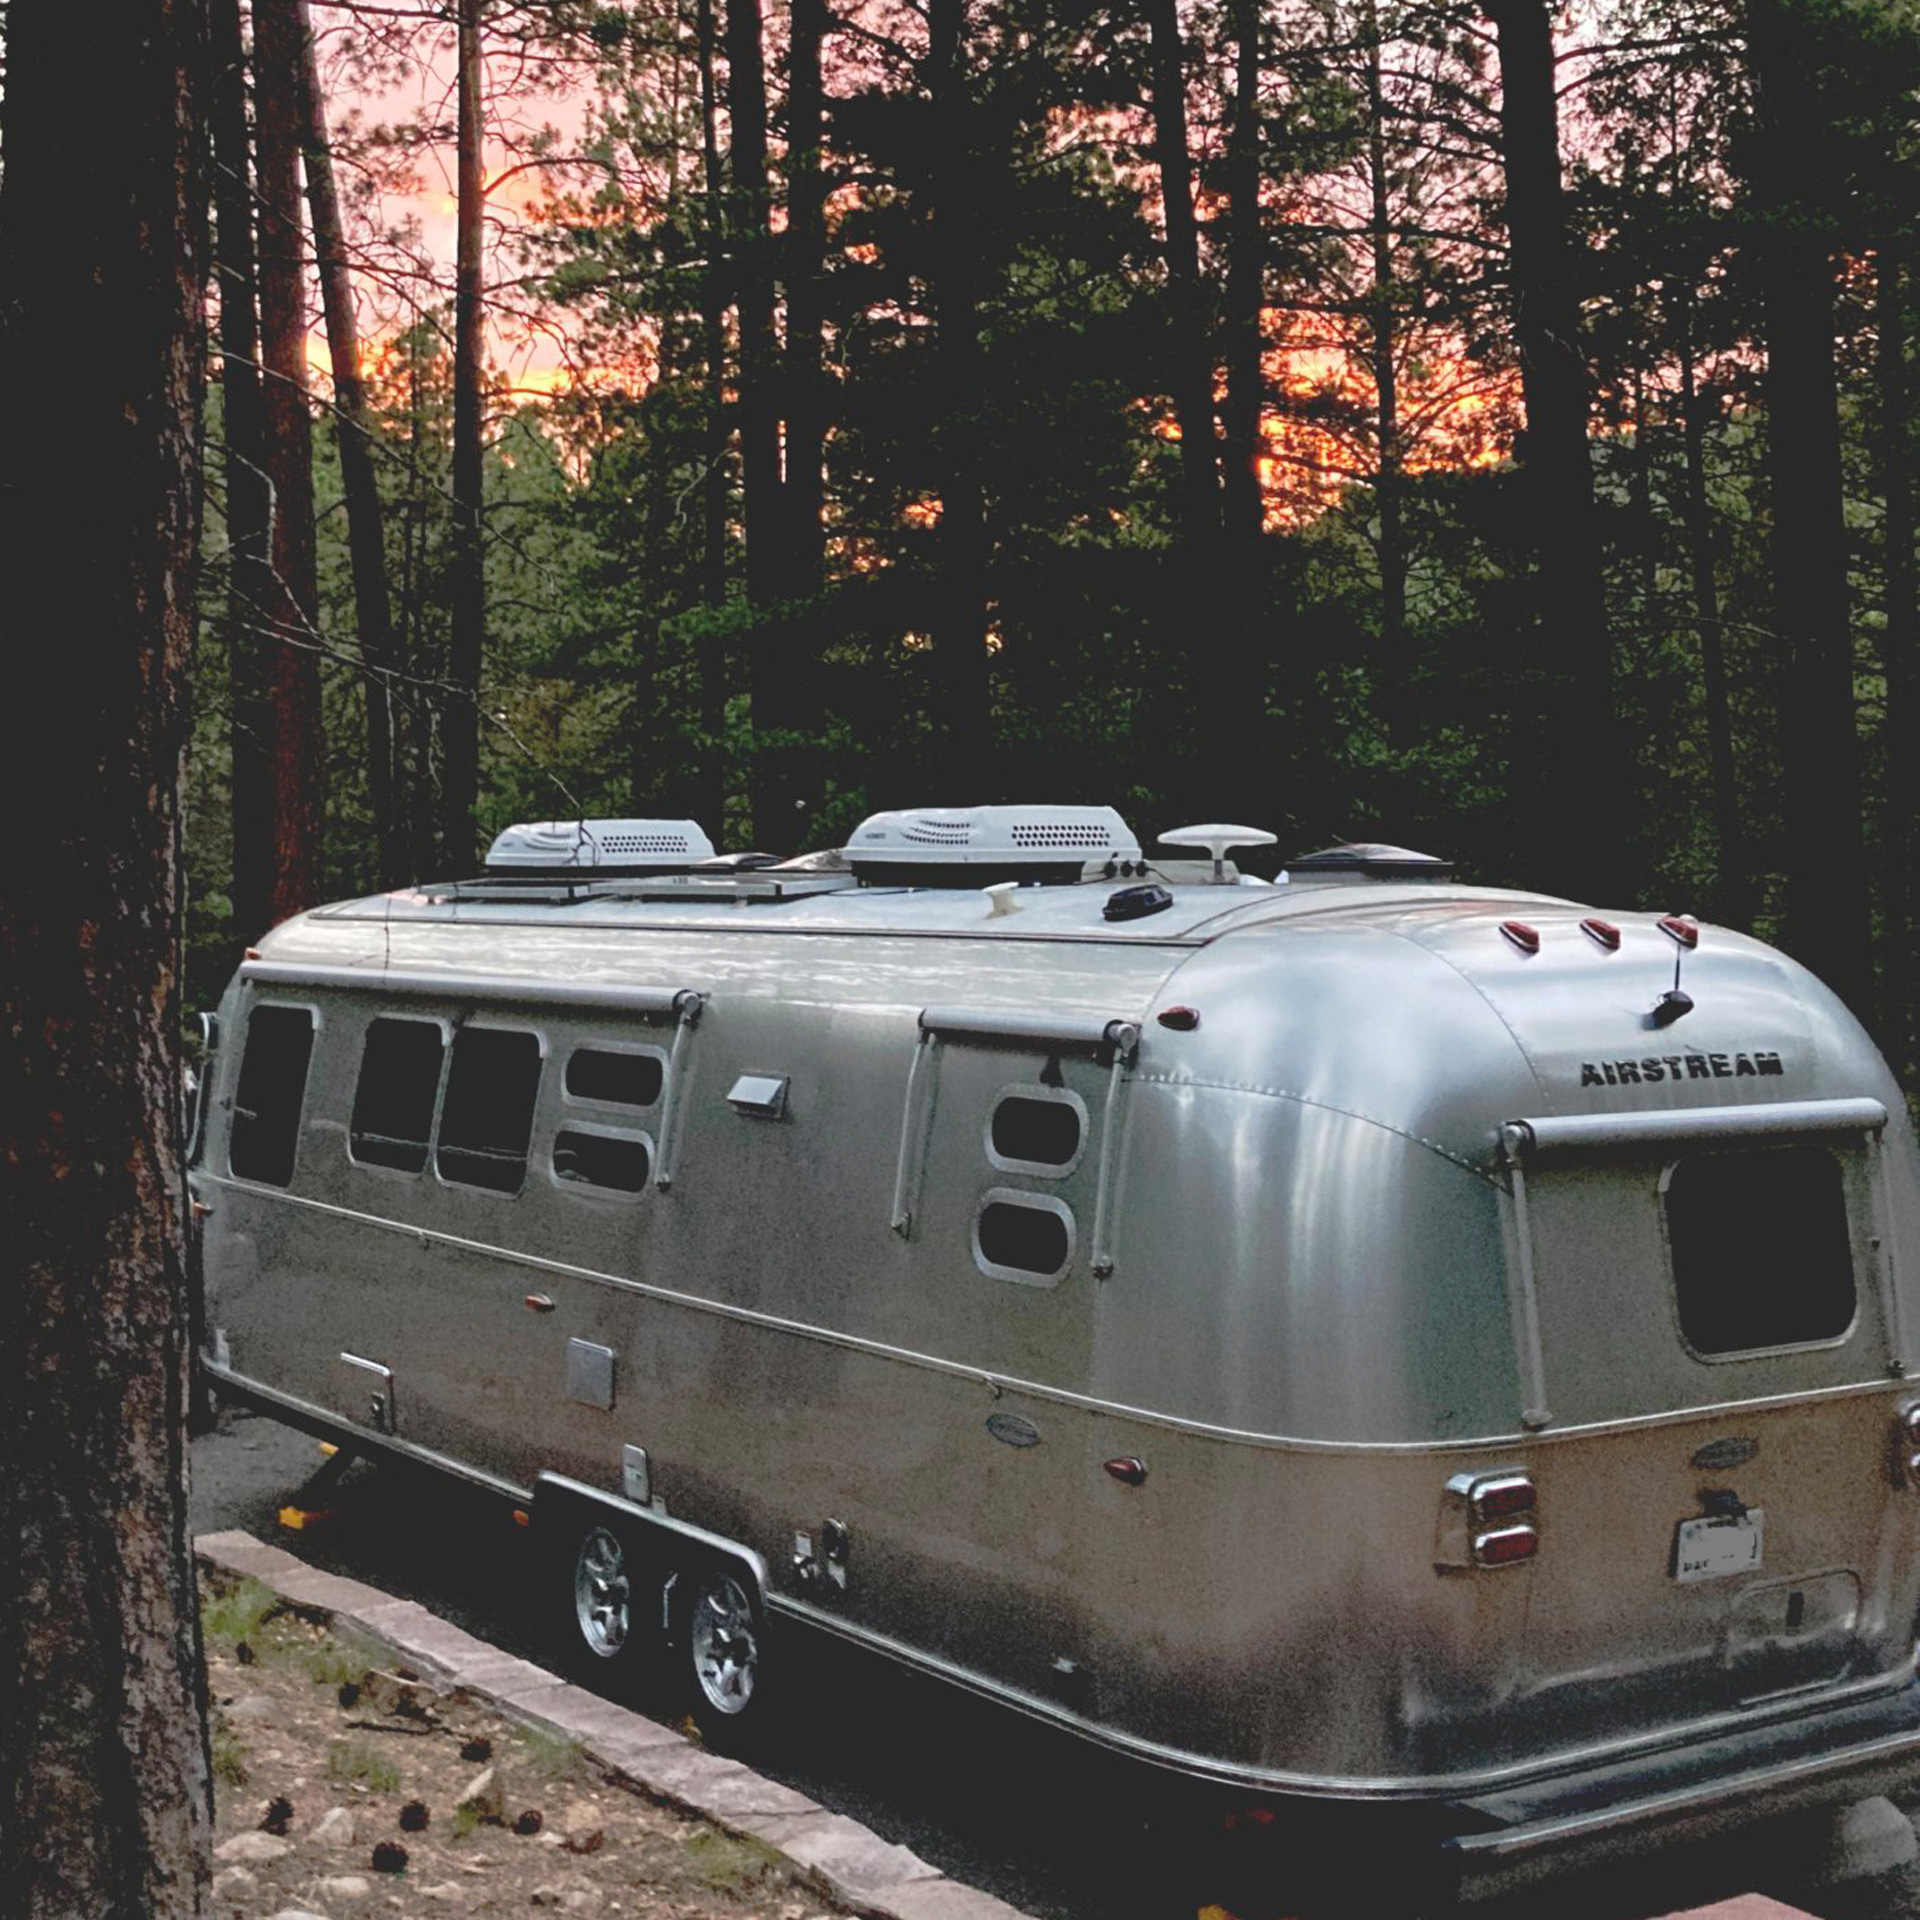 Airstream travel trailer parked next to trees during a sunset that is orange and pink.